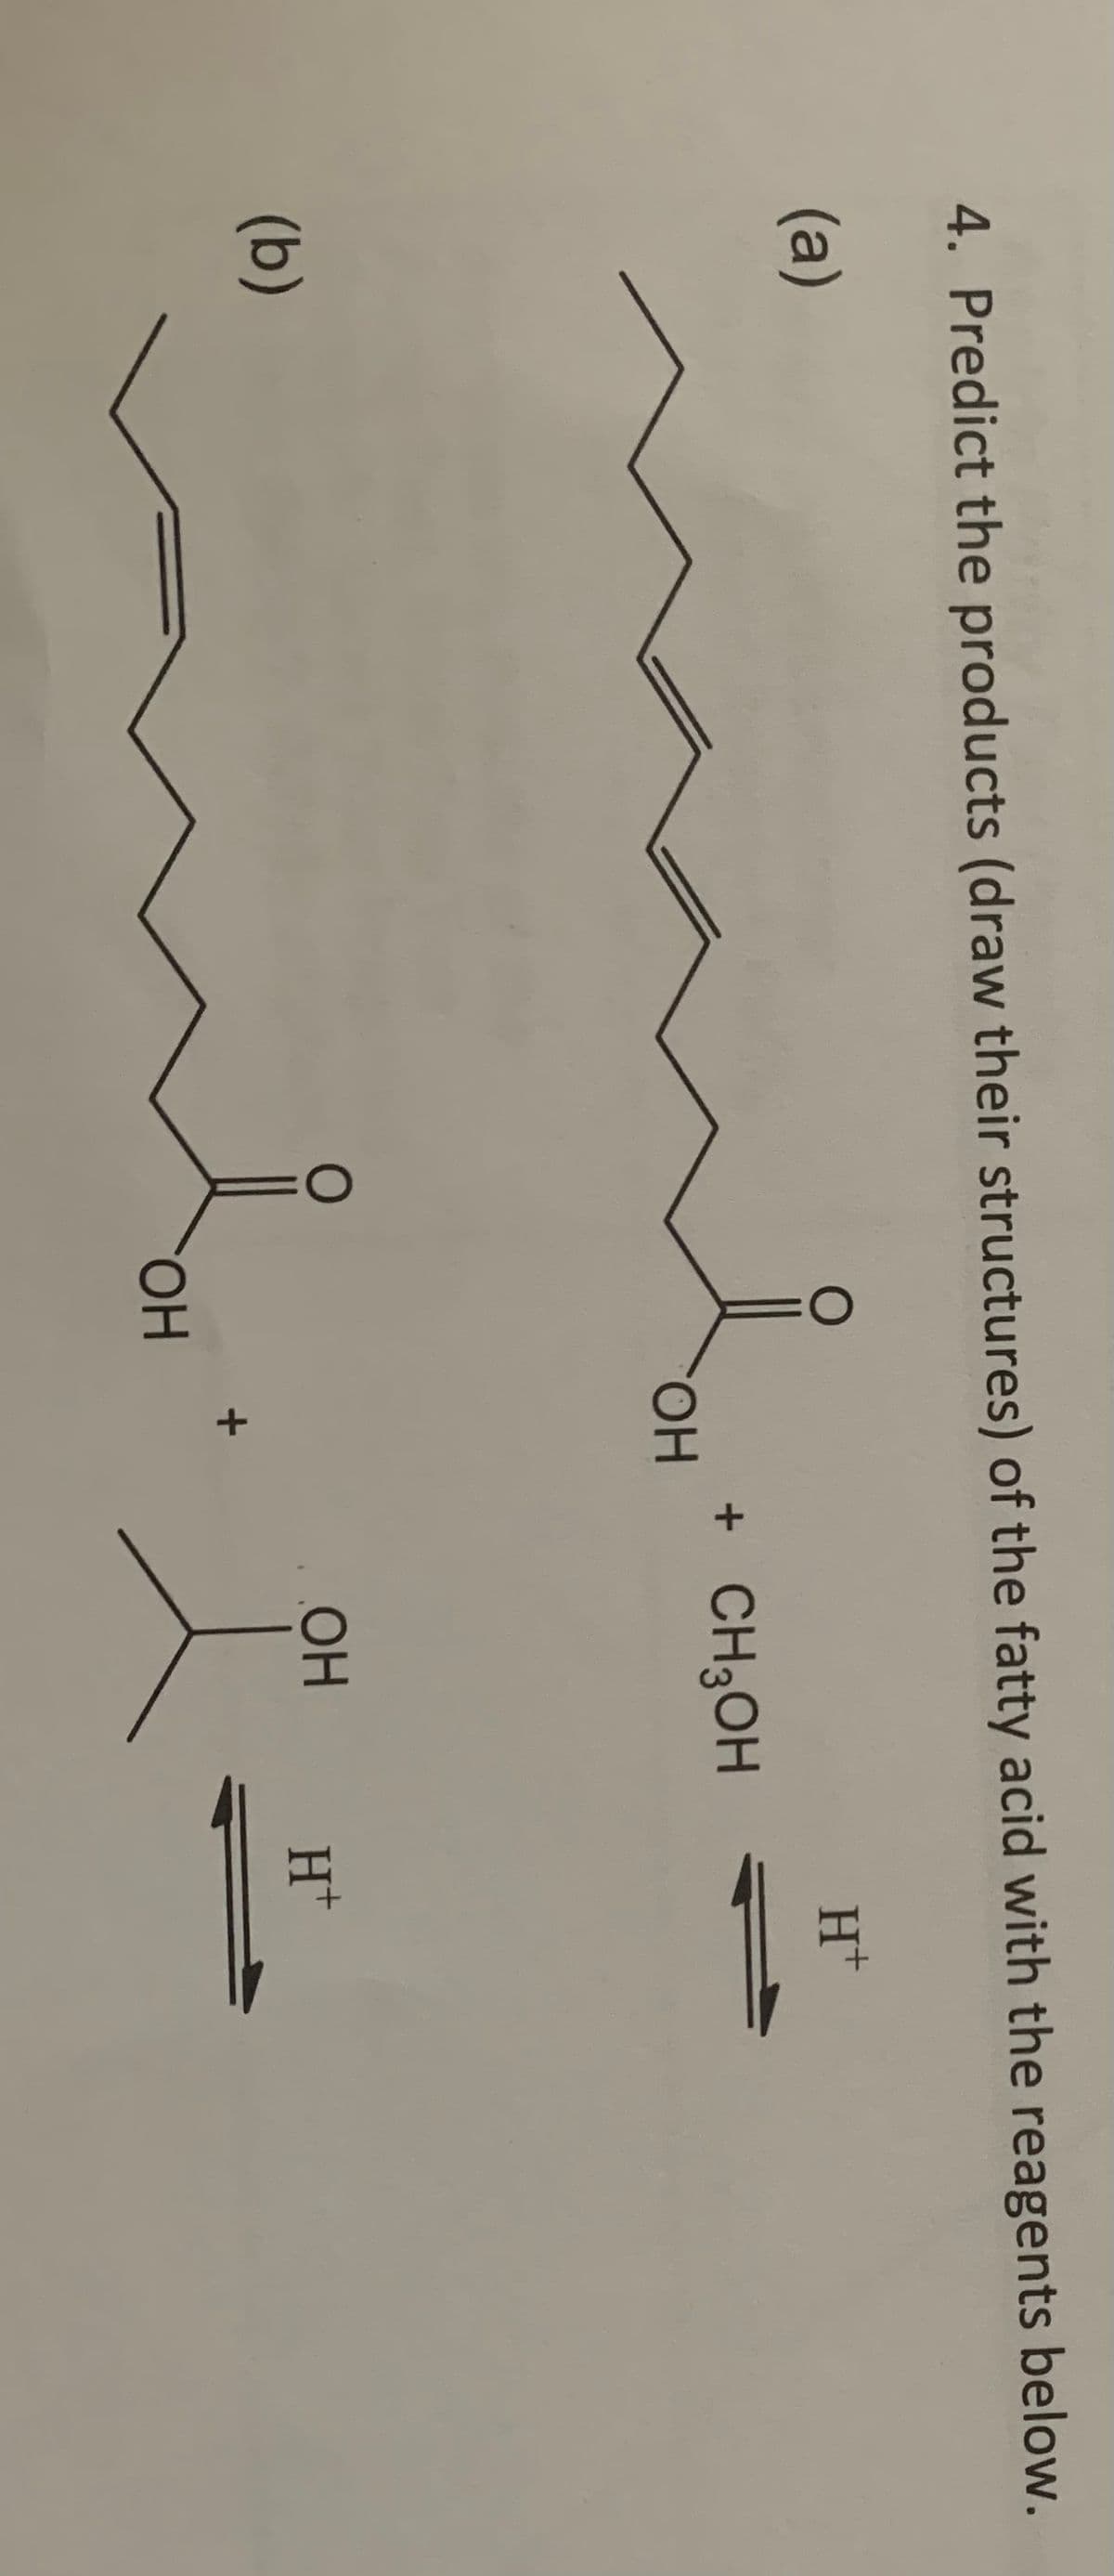 4. Predict the products (draw their structures) of the fatty acid with the reagents below.
(a)
(b)
OH
OH
+
+ CH3OH
OH
2.
H+
H+